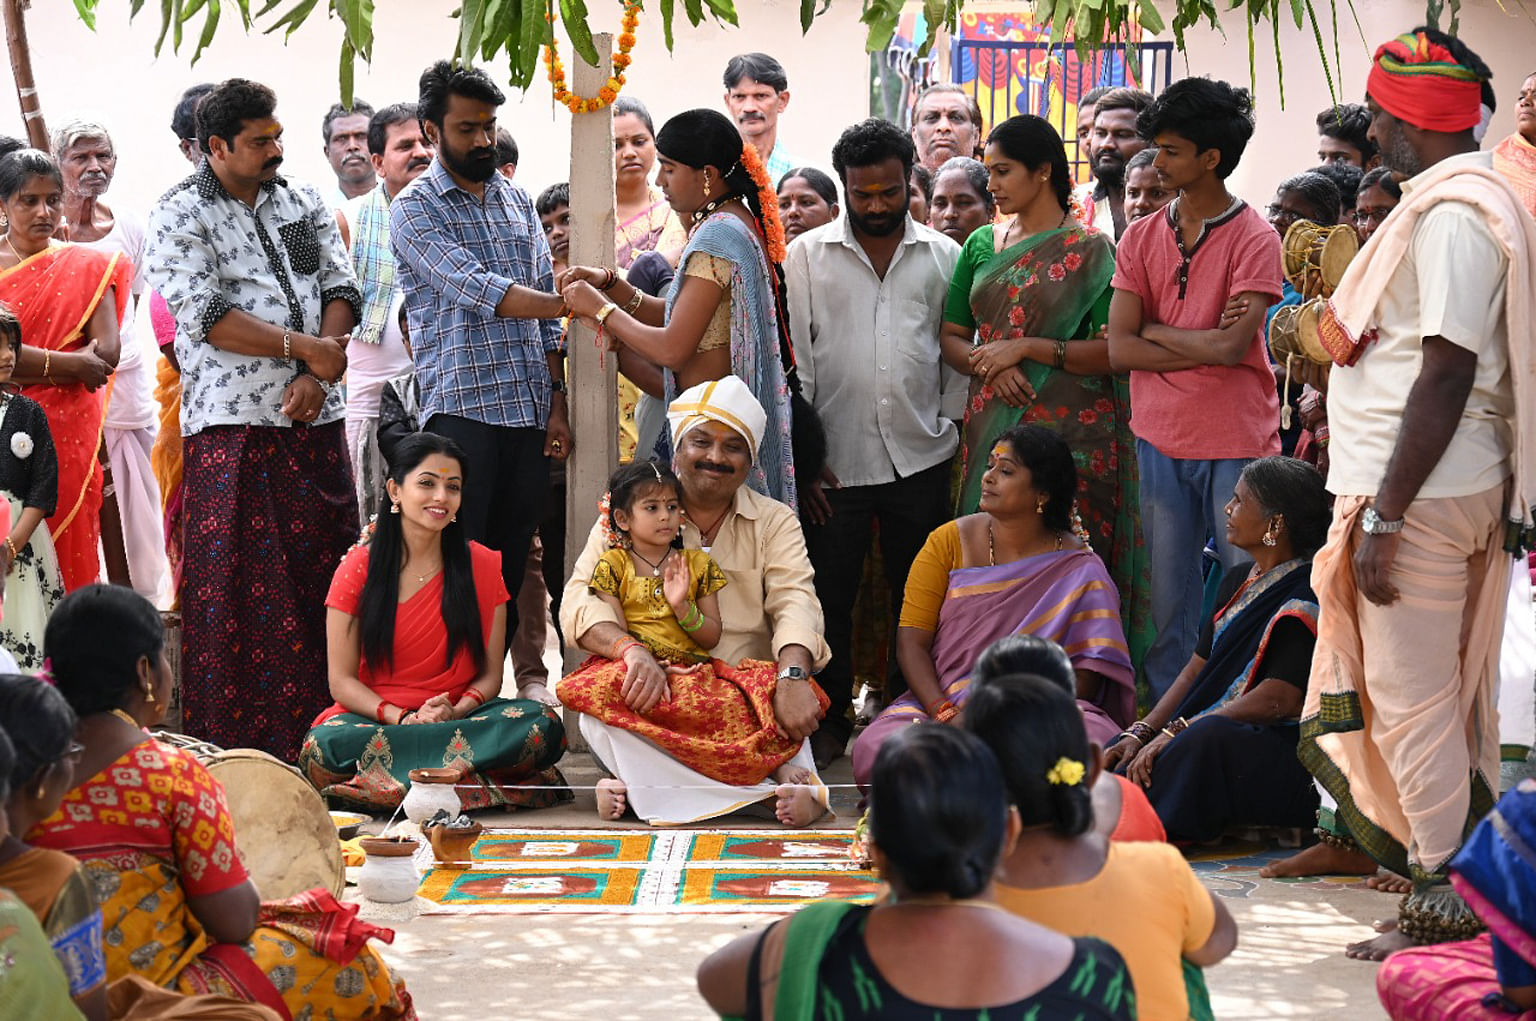 Aha's upcoming film, Intinti Ramyanam is a tale that refers to the familiar beats in middle-class Indian rural life | Aha